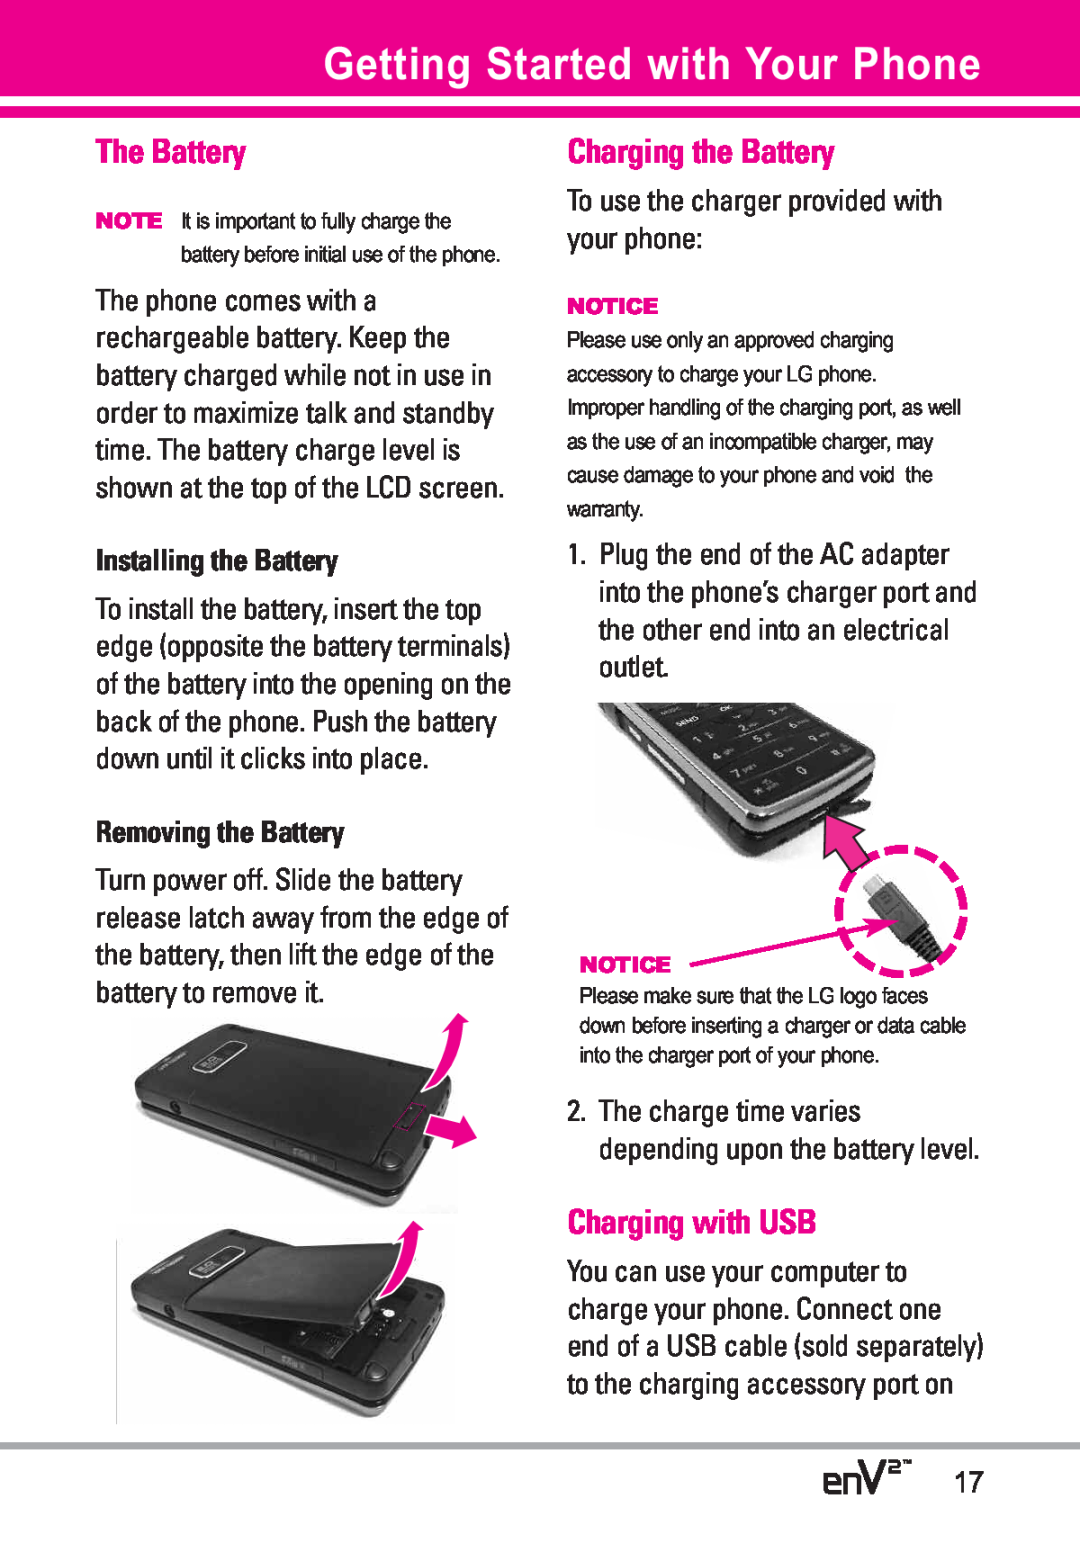 LG Electronics EnV2 manual Getting Started with Your Phone, The Battery, Charging the Battery, Charging with USB 